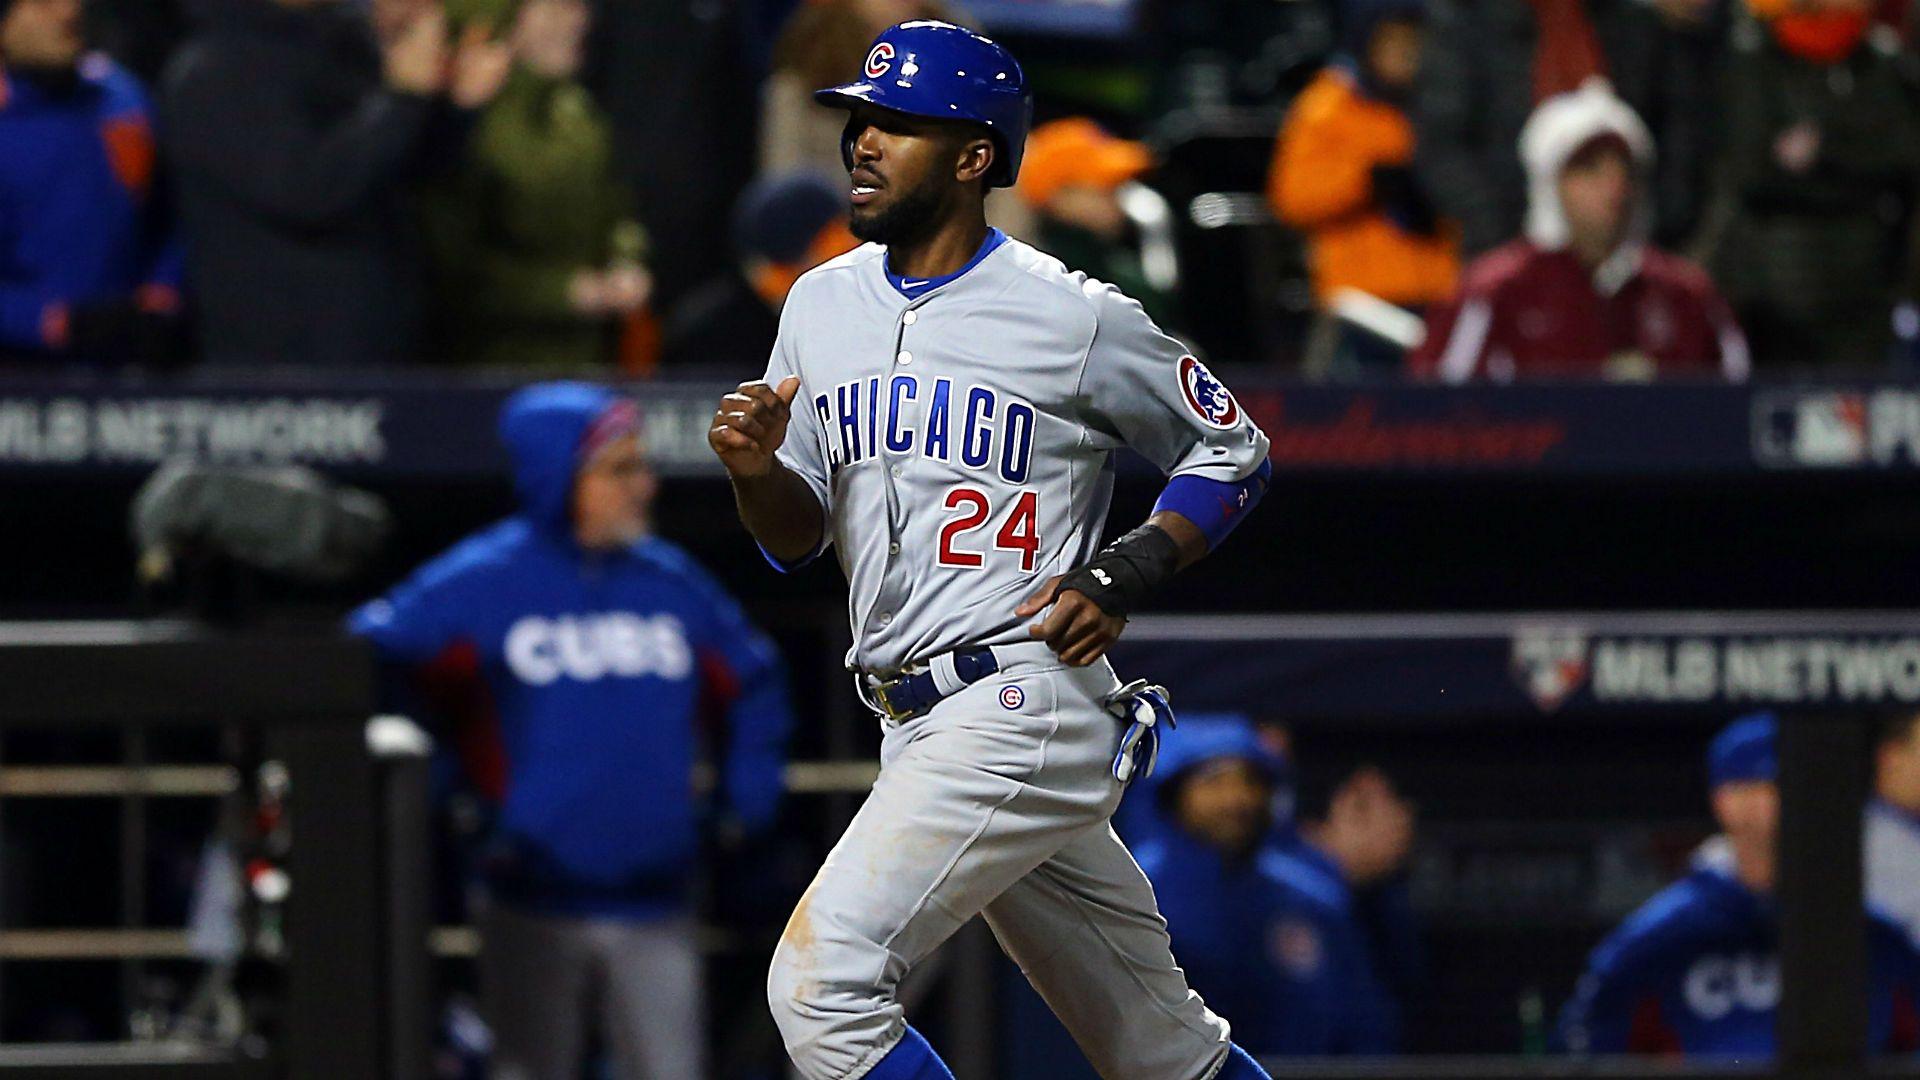 Dexter Fowler snubs Orioles for return to Cubs in spring training